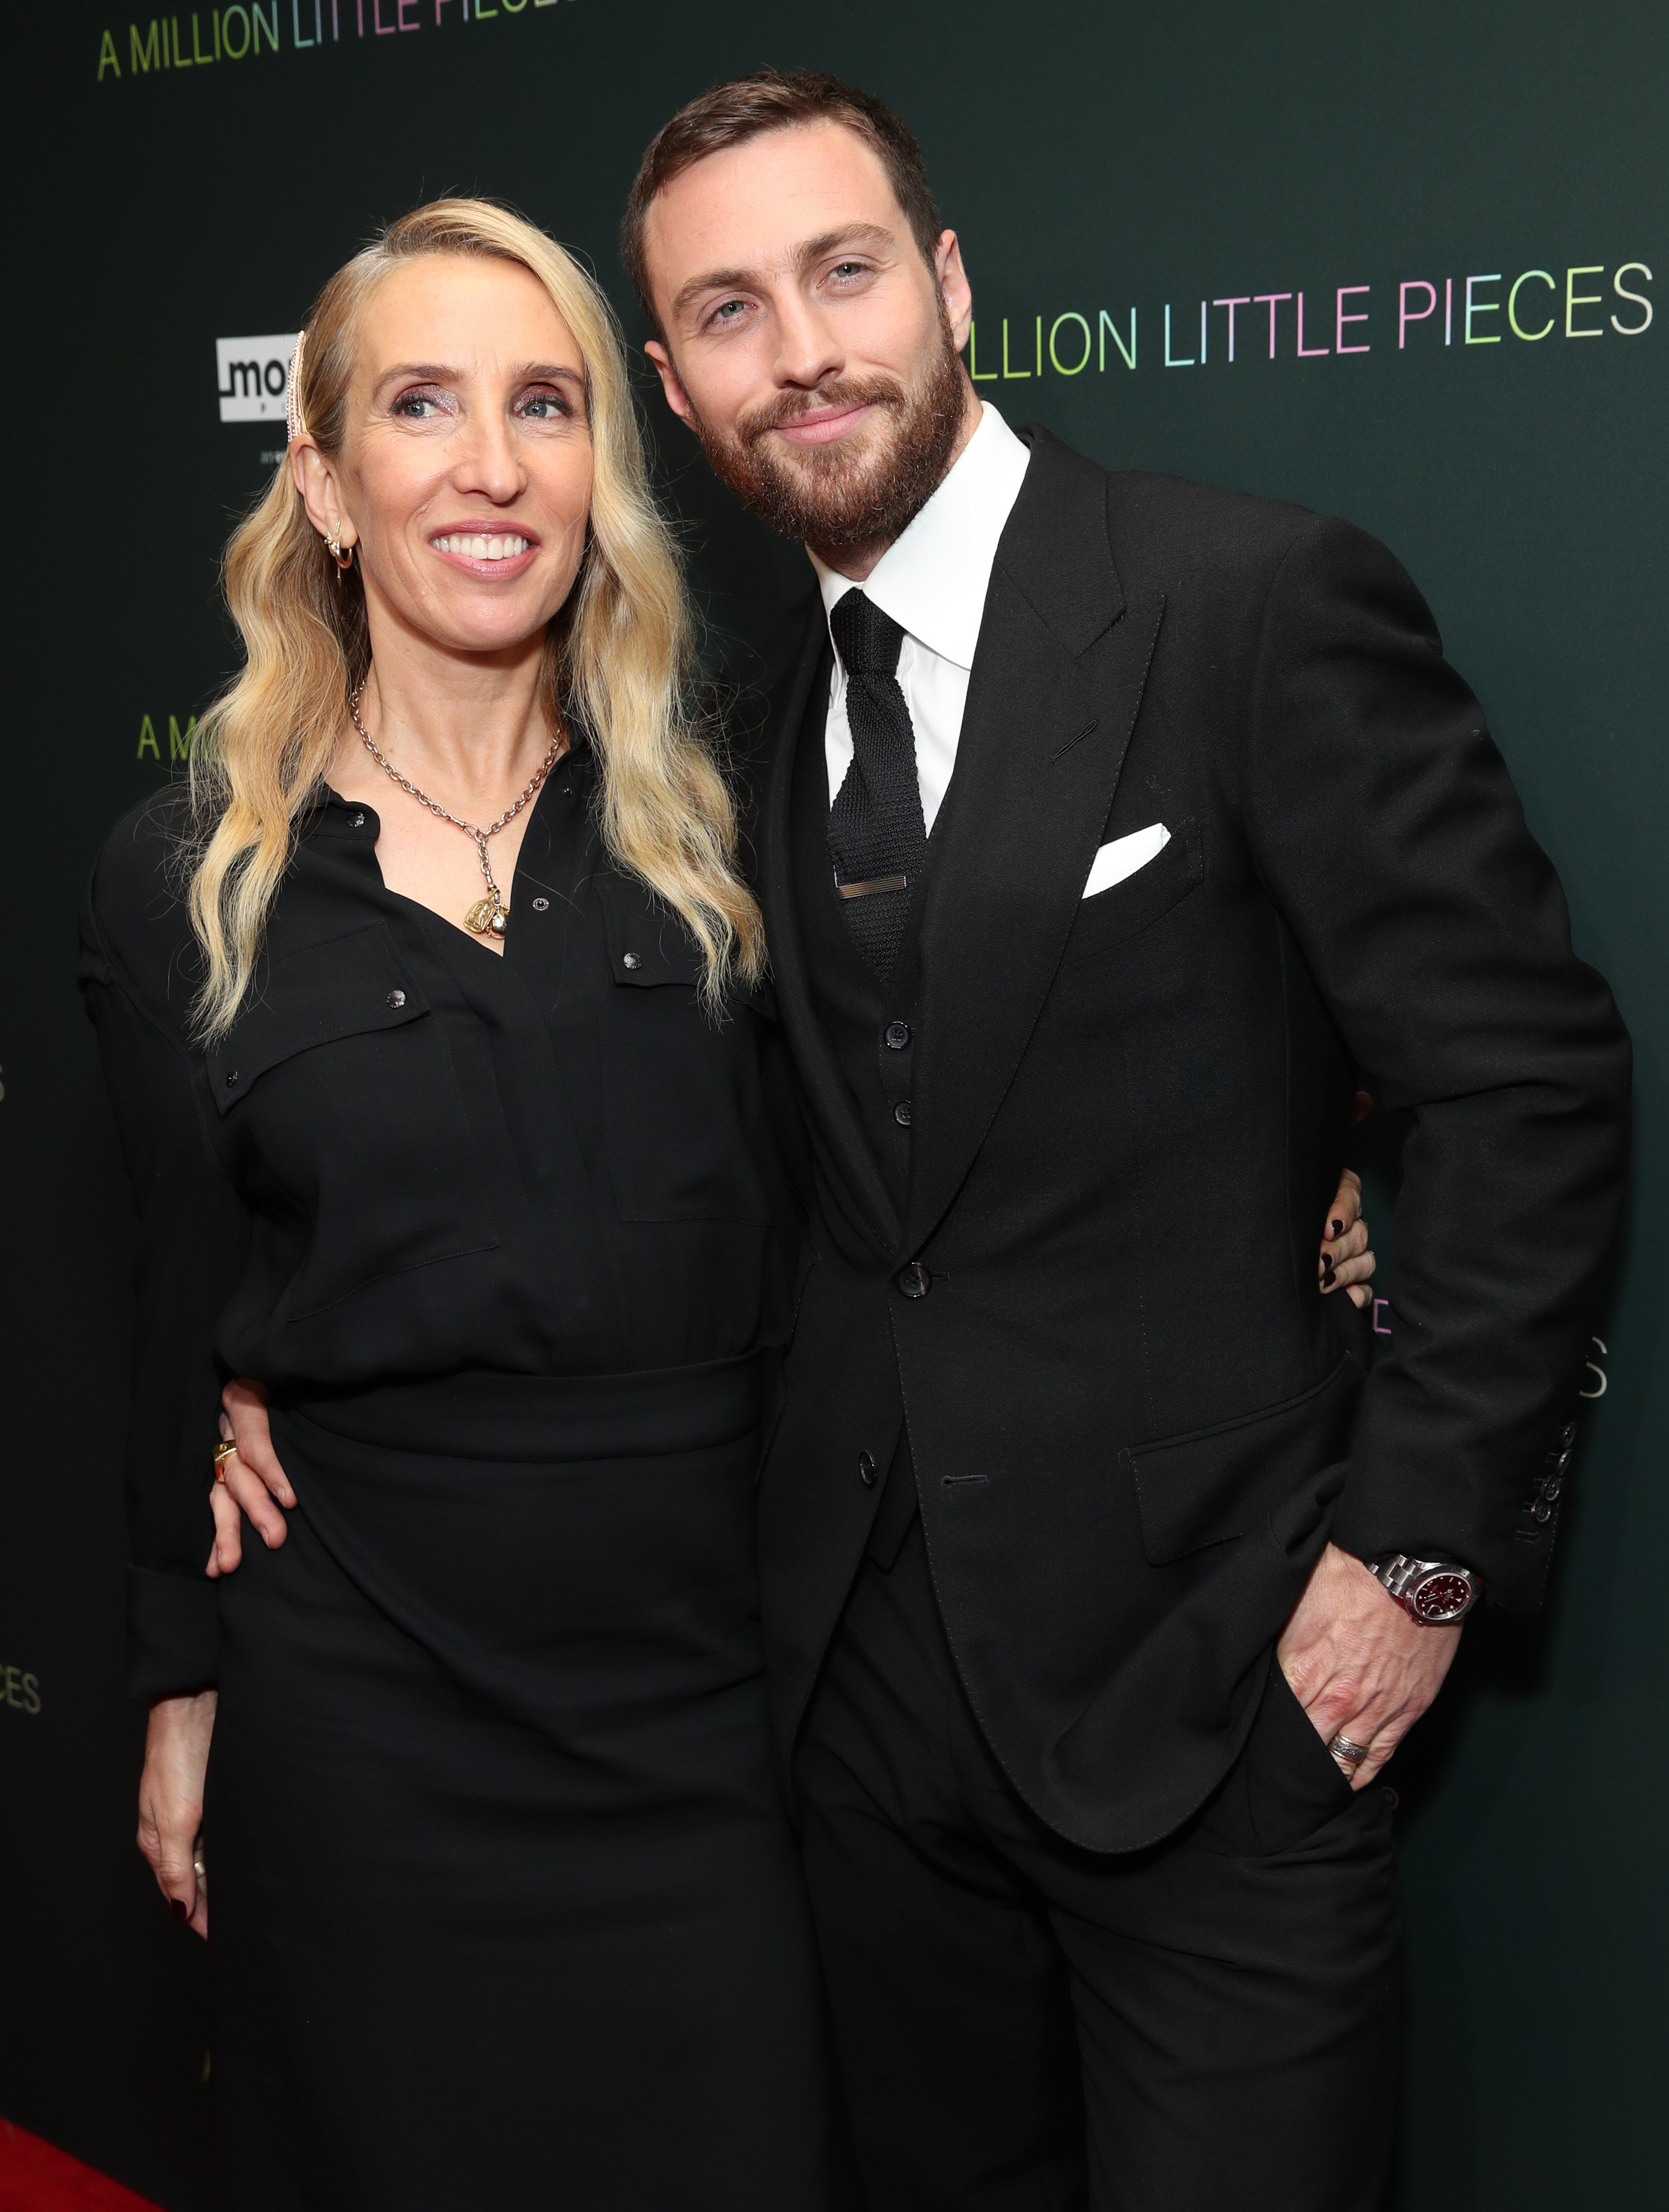 Sam Taylor-Johnson and Aaron Taylor-Johnson attend the special screening of Momentum Pictures' "A Million Little Pieces" at The London Hotel on December 04, 2019 in West Hollywood, California. | Source: Getty Images